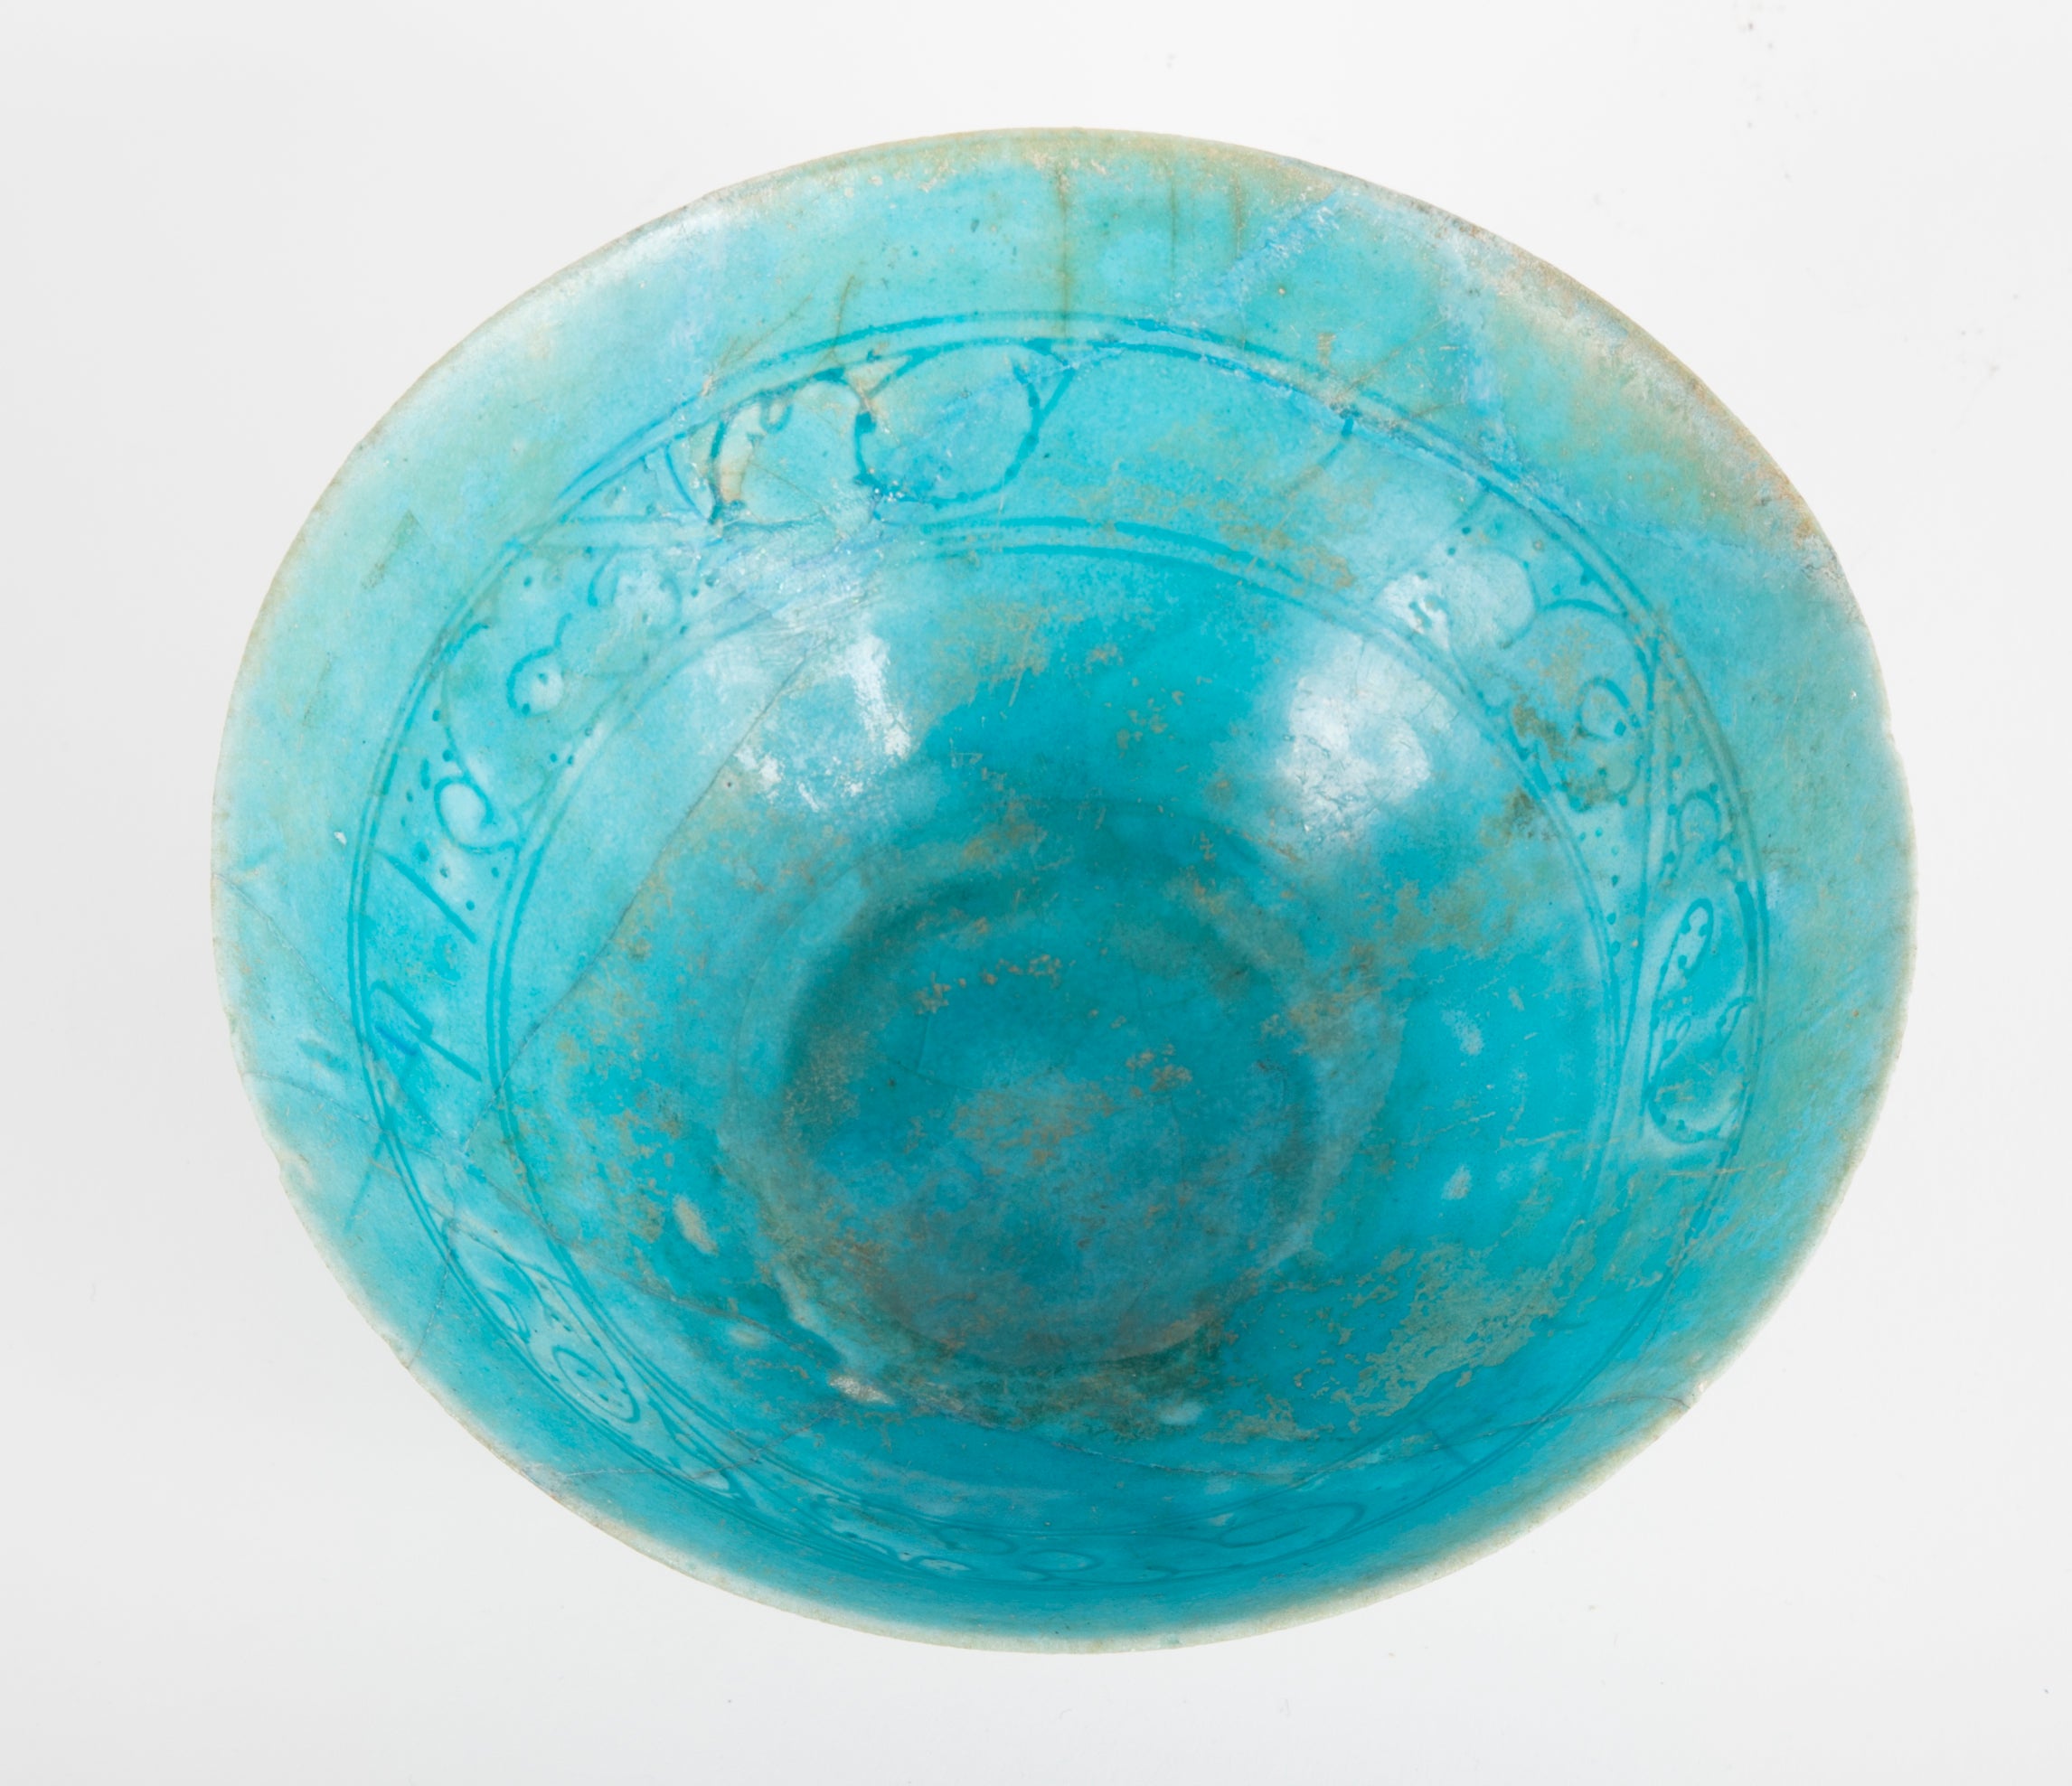 Footed Conical Form Kashan Turquoise Glazed Pottery Bowl